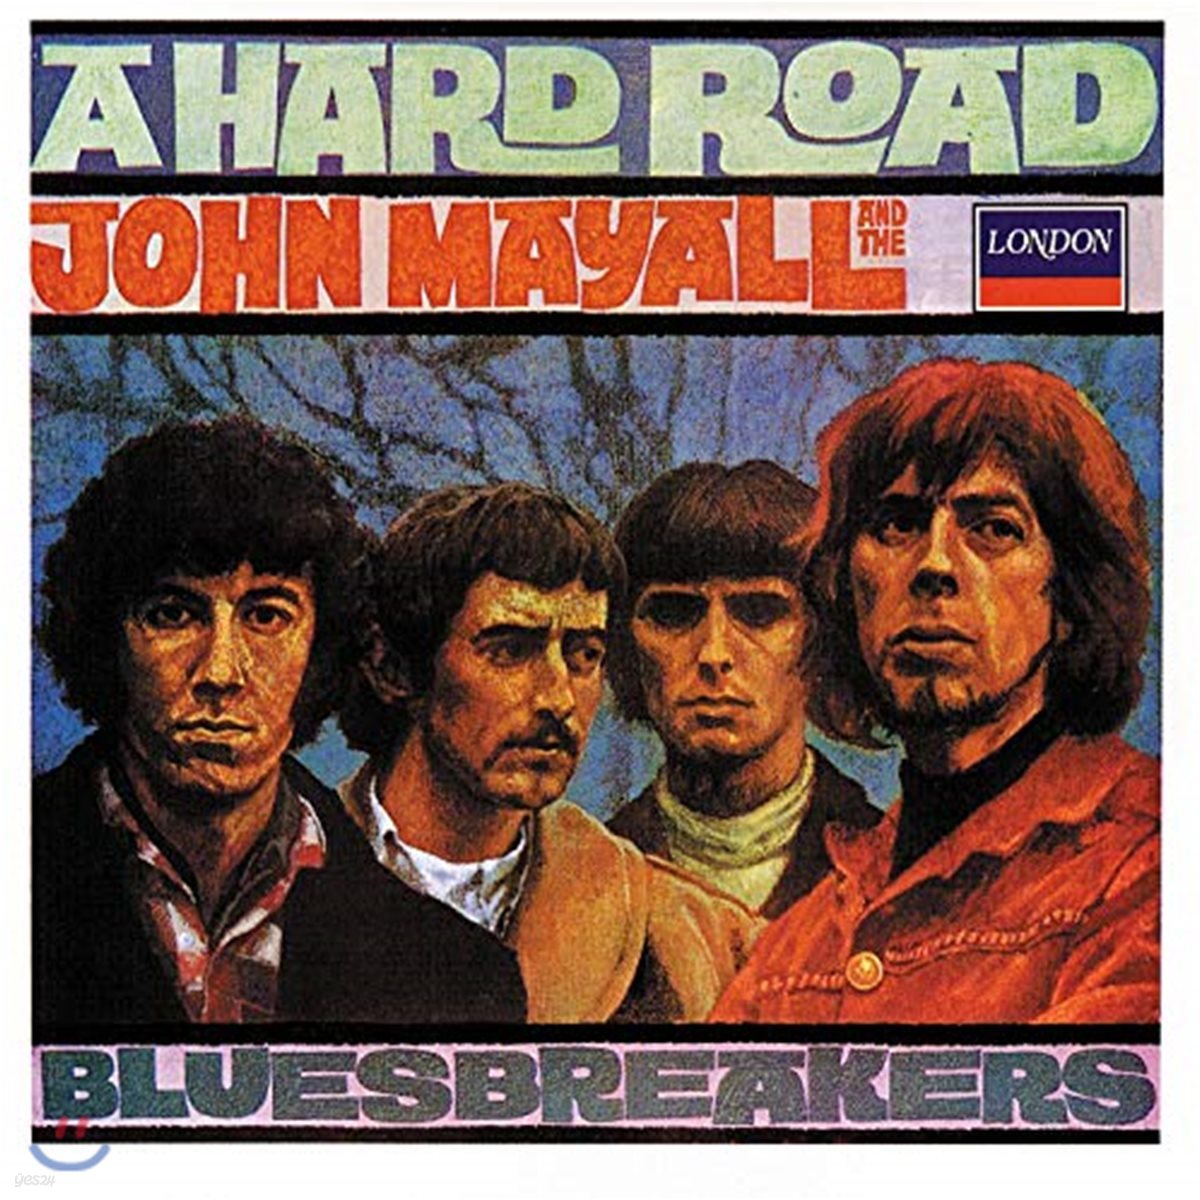 John Mayall And The Blues Breakers - 3집 A Hard Road [LP]